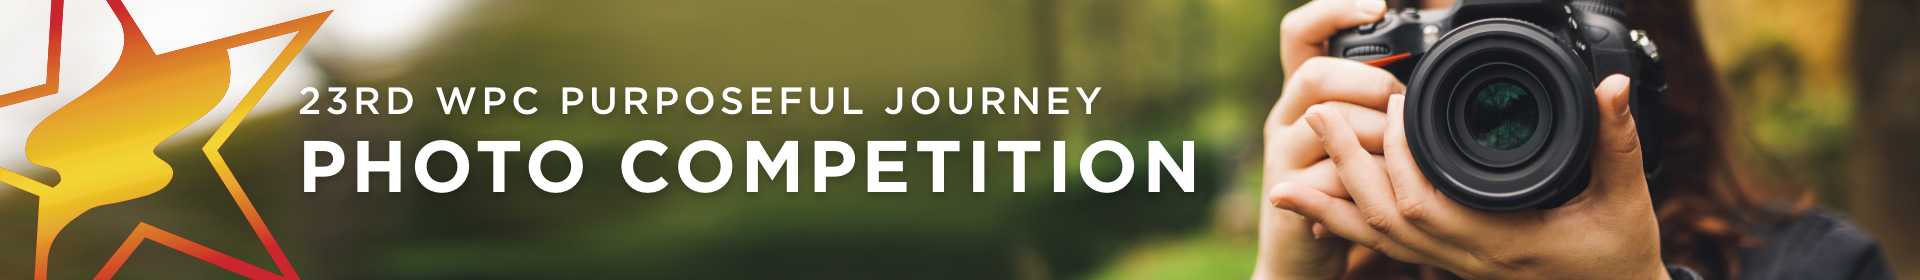 23rd WPC Purposeful Journey Photo Competition